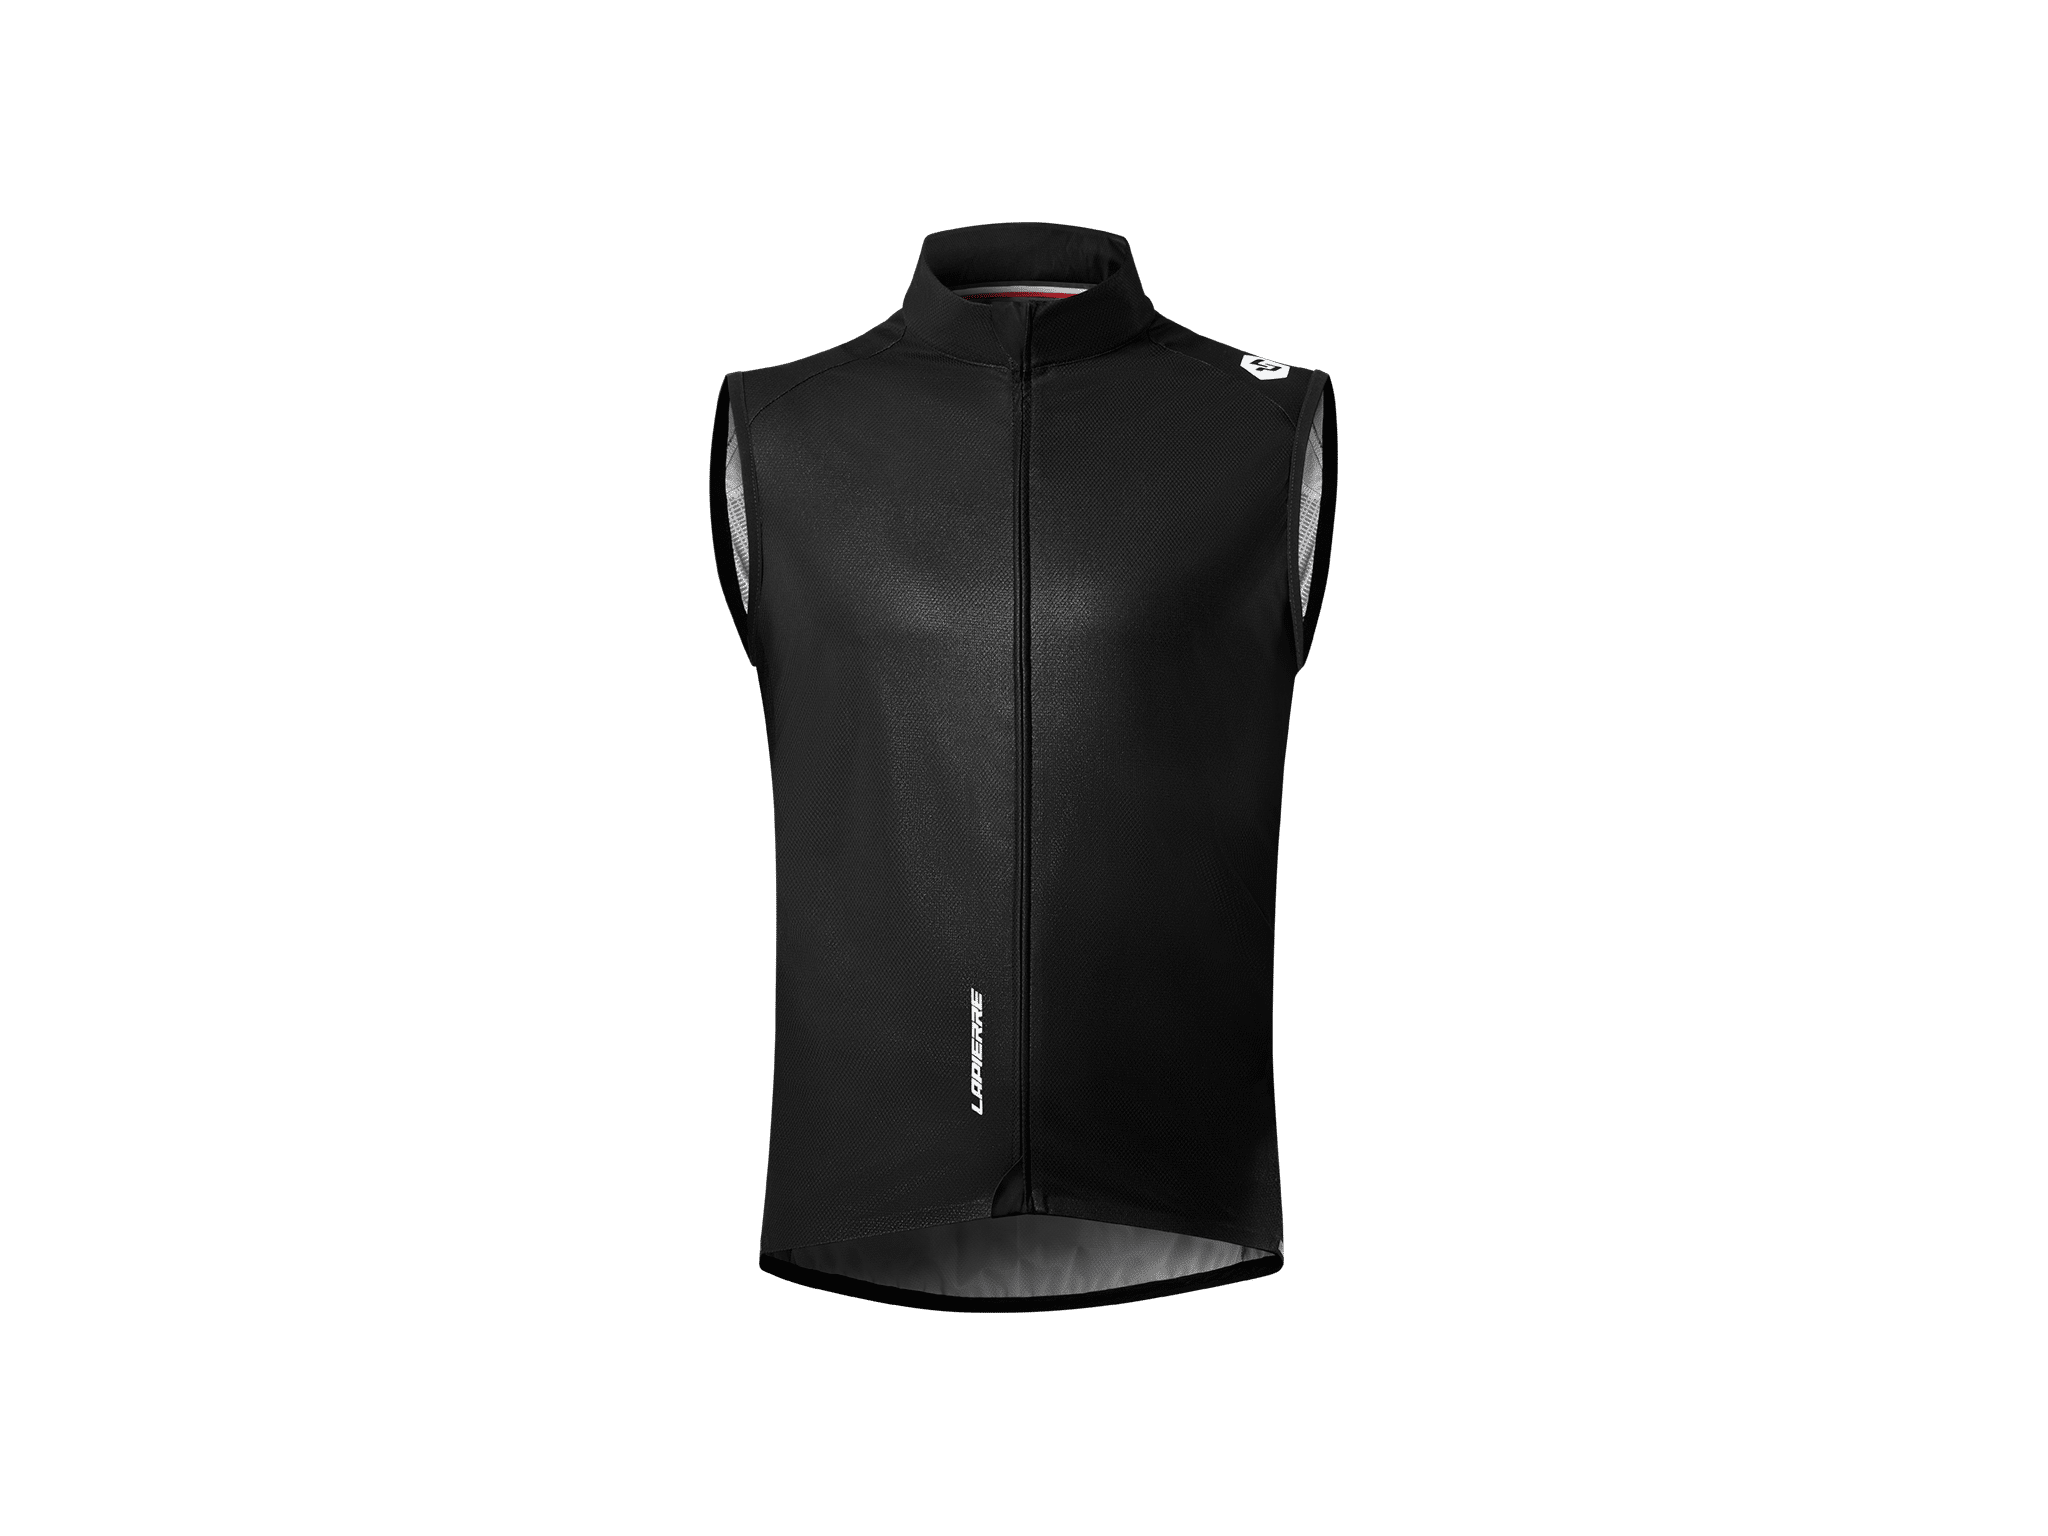 https://adfnjoxprq.cloudimg.io/v7/_lapierre_prod/media/0b/ff/11/1636991529/2021-Lapierre-Ultimate-sleeveless-cycling-windbreaker-Black-cover.png